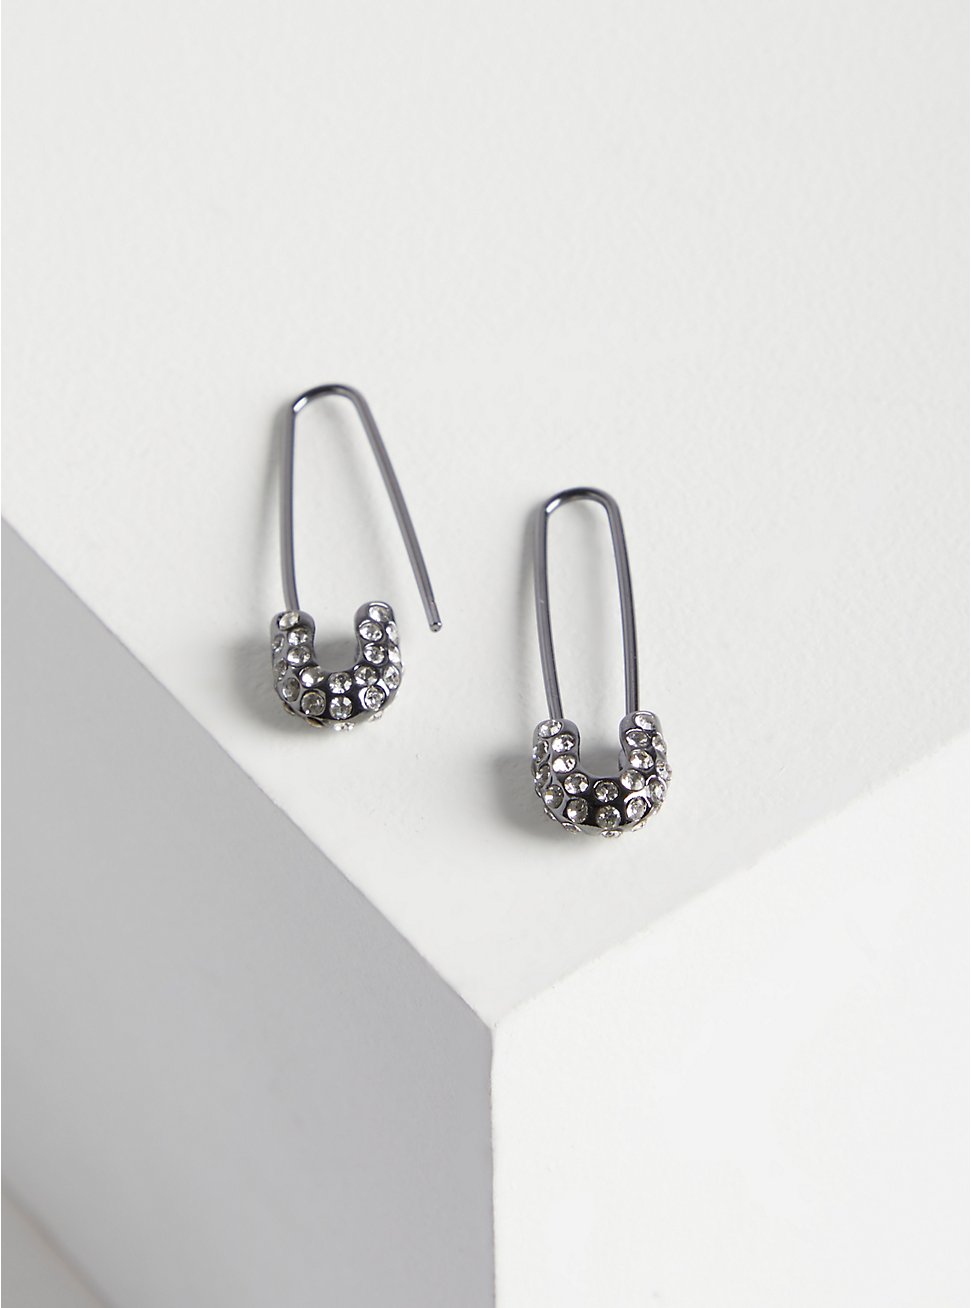 Plus Size Safety Pin Earrings - Hematite Tone, , hi-res